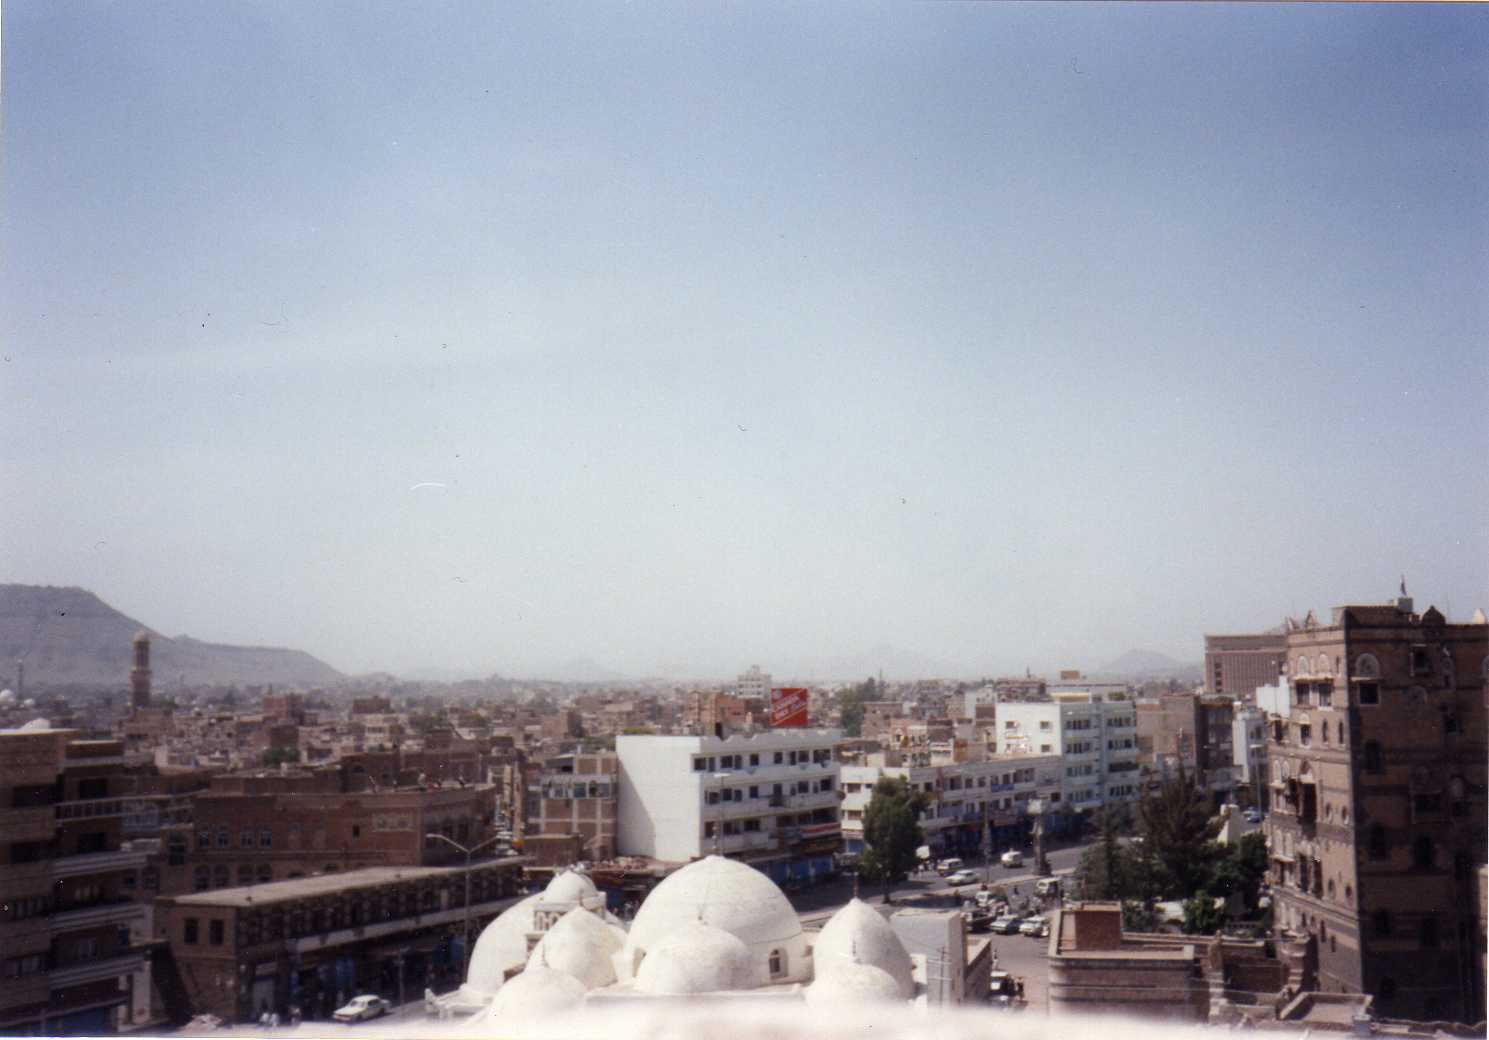 A photo of downtown Sana'a taken in 1992 (Source: Wikimedia Commons).